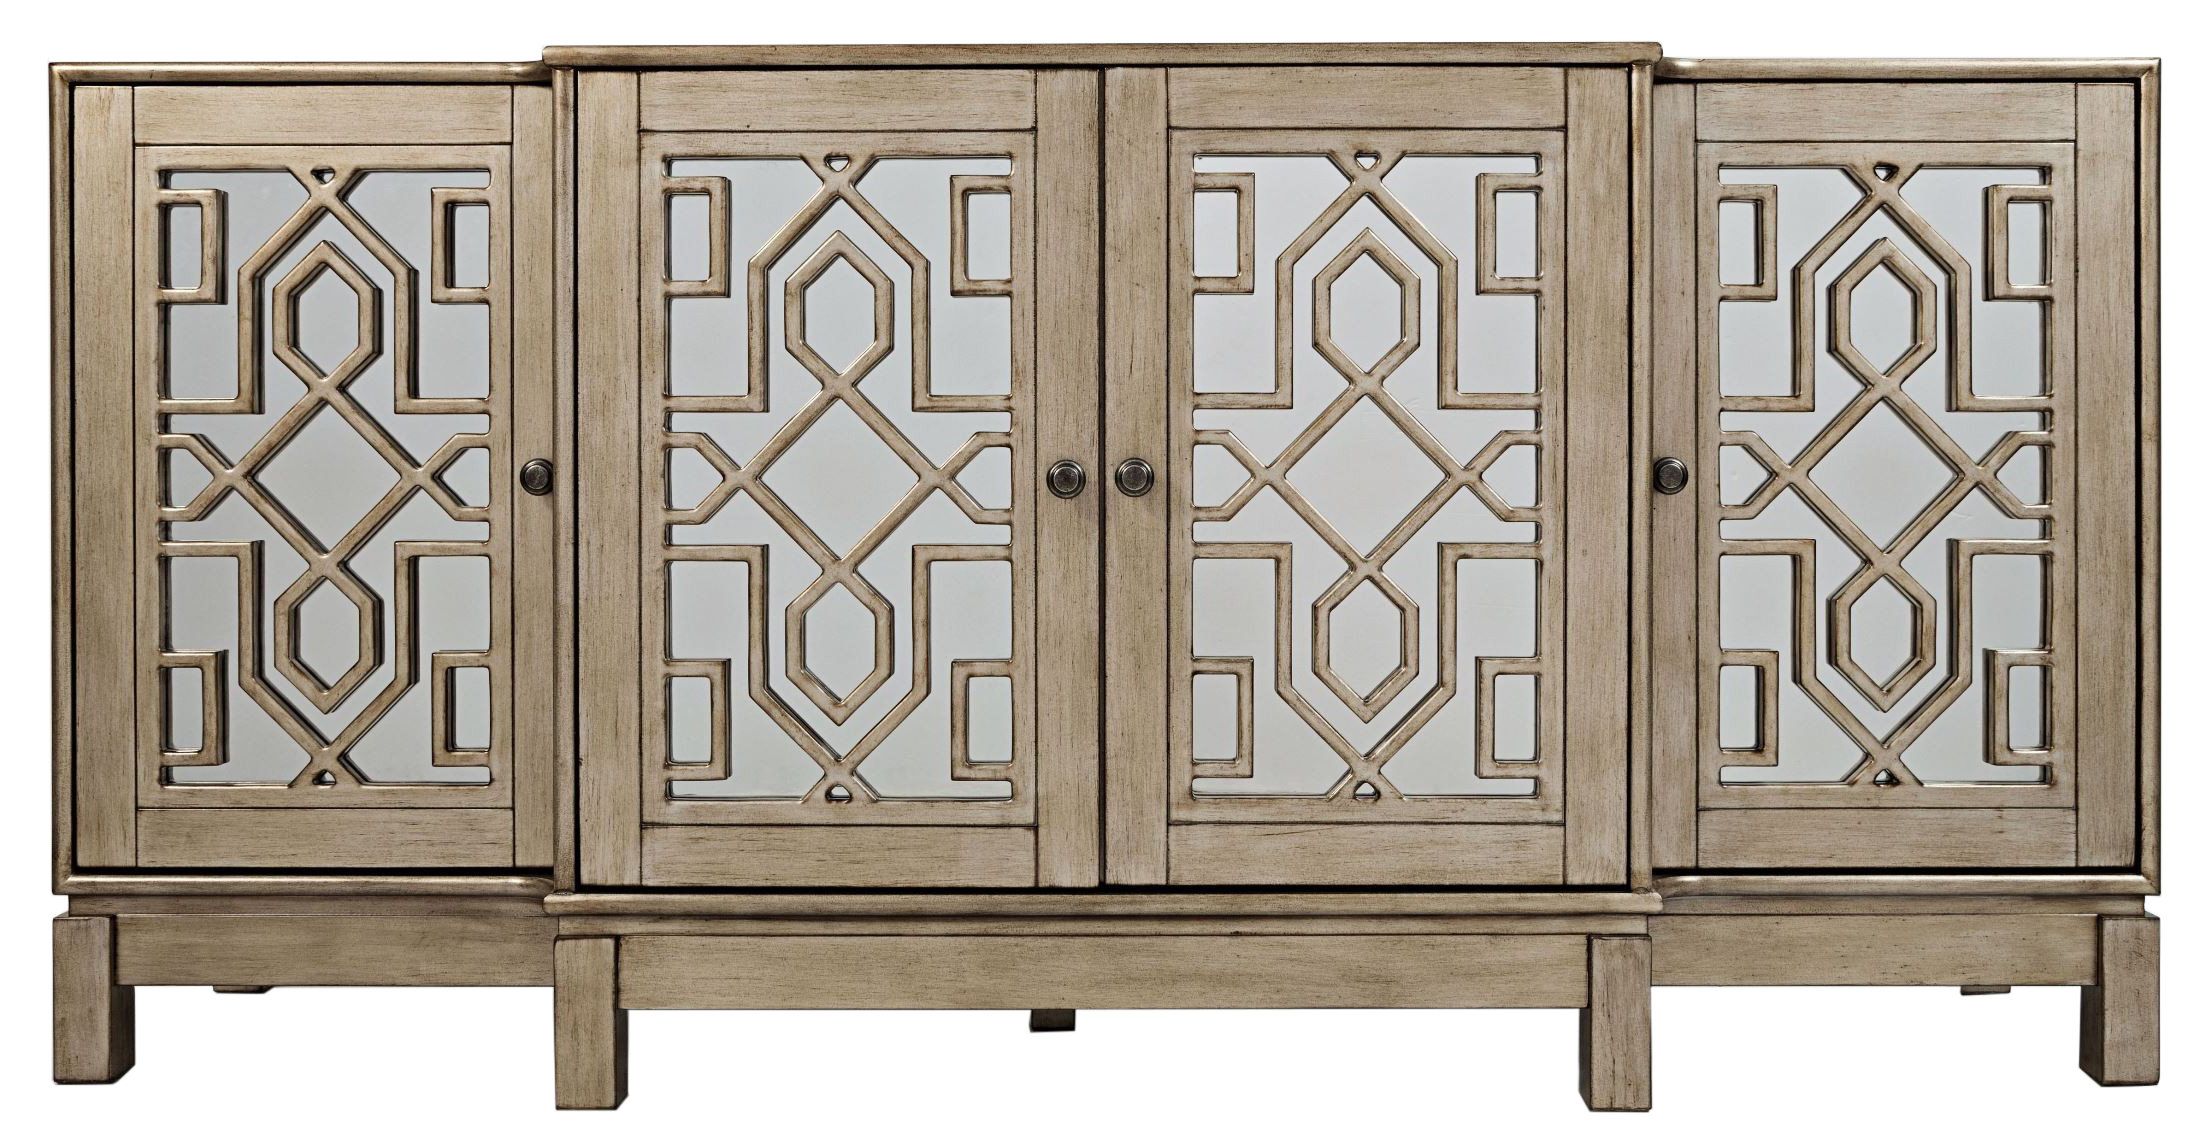 Sideboards & Buffet Tables | Joss & Main Intended For Chicoree Charlena Sideboards (Gallery 3 of 20)